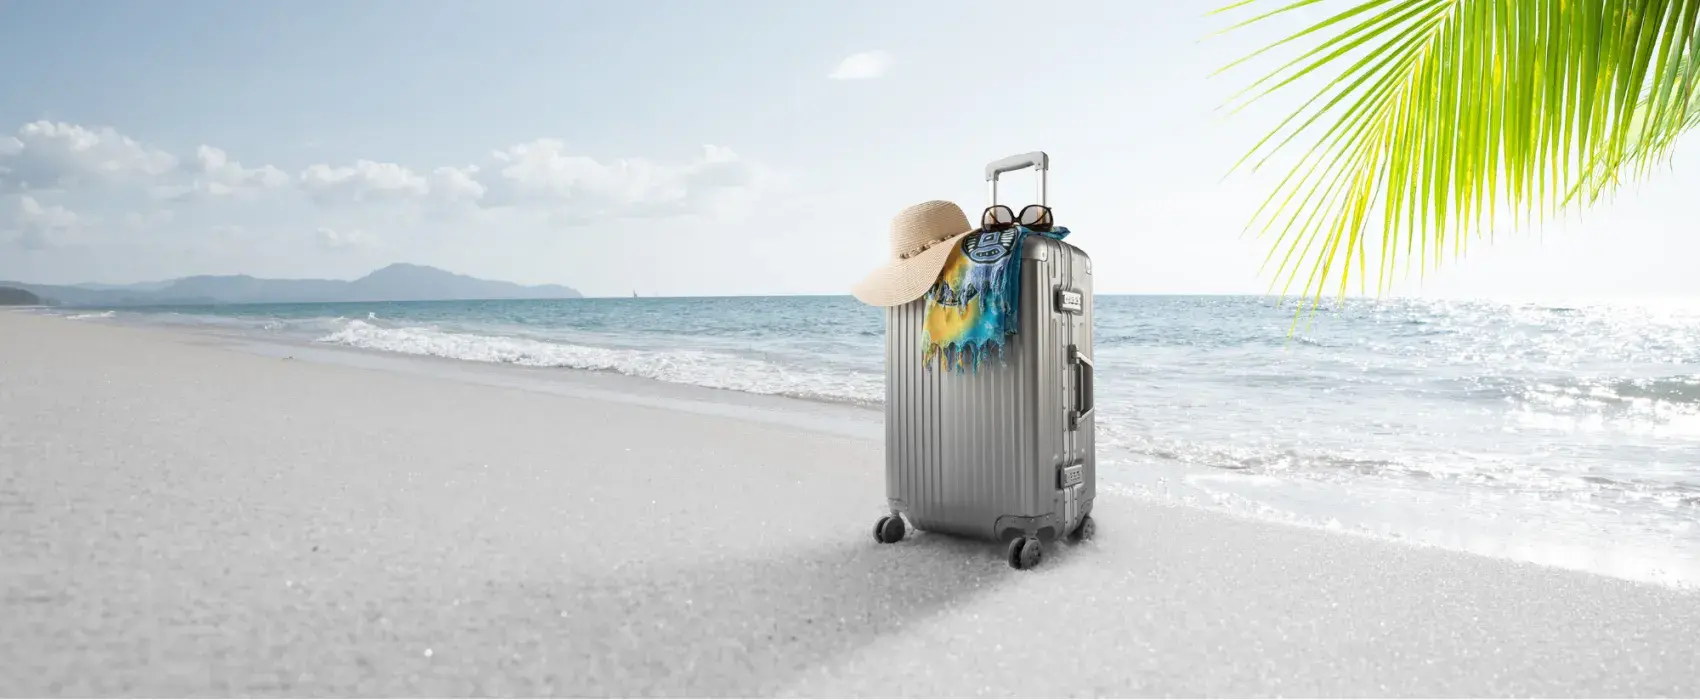 Beach with Suitcase